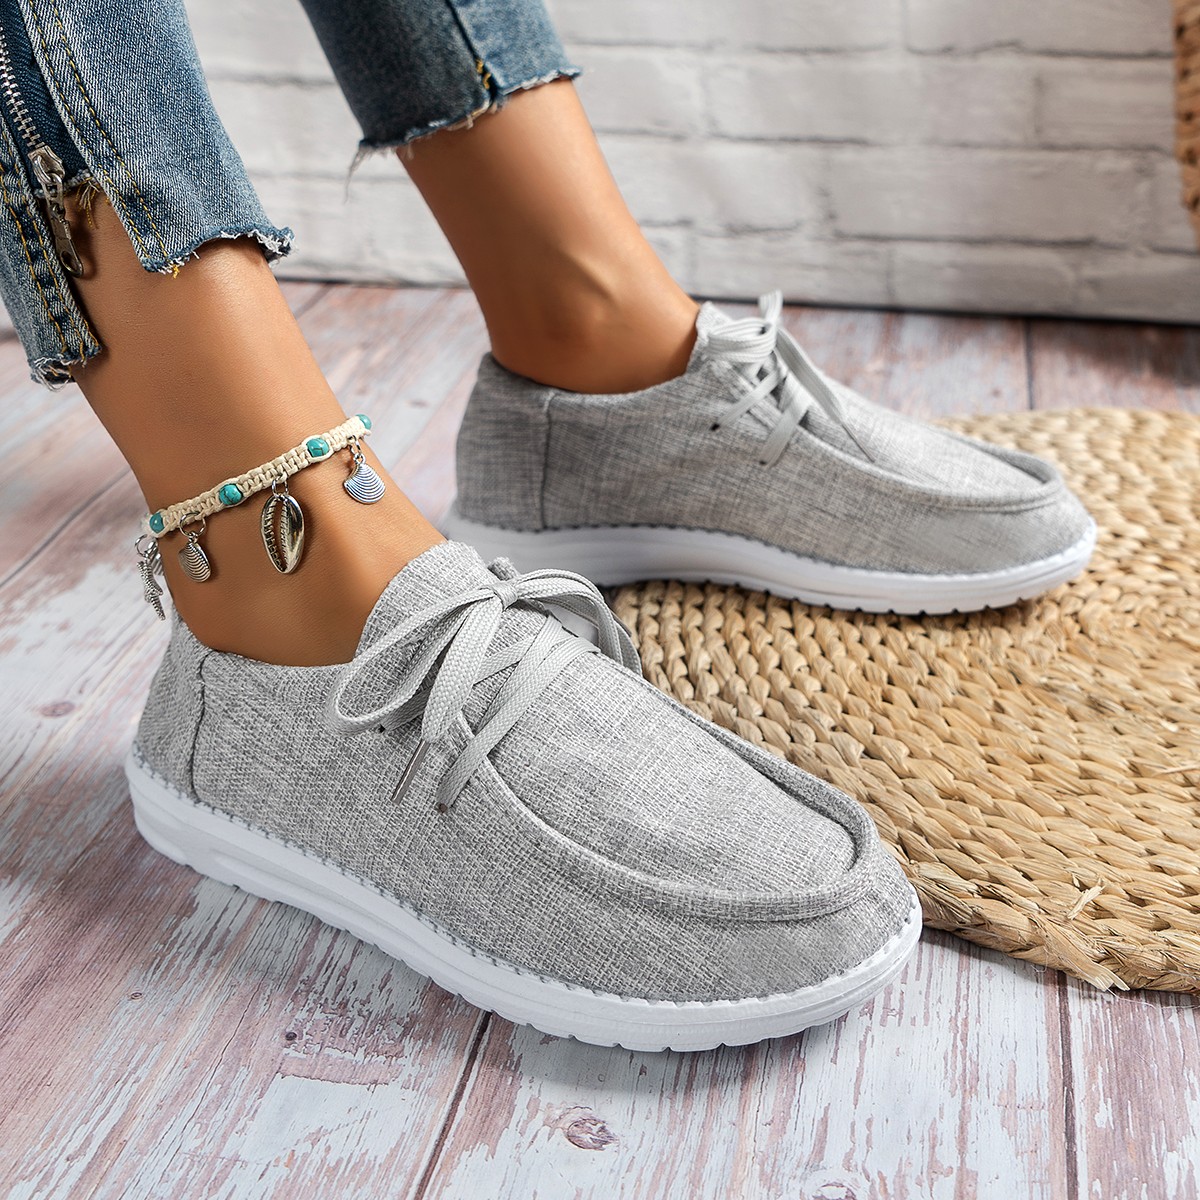 lystmrge Women Shoes Sneakers Canvas Womens Sneakers Size 9 Wide